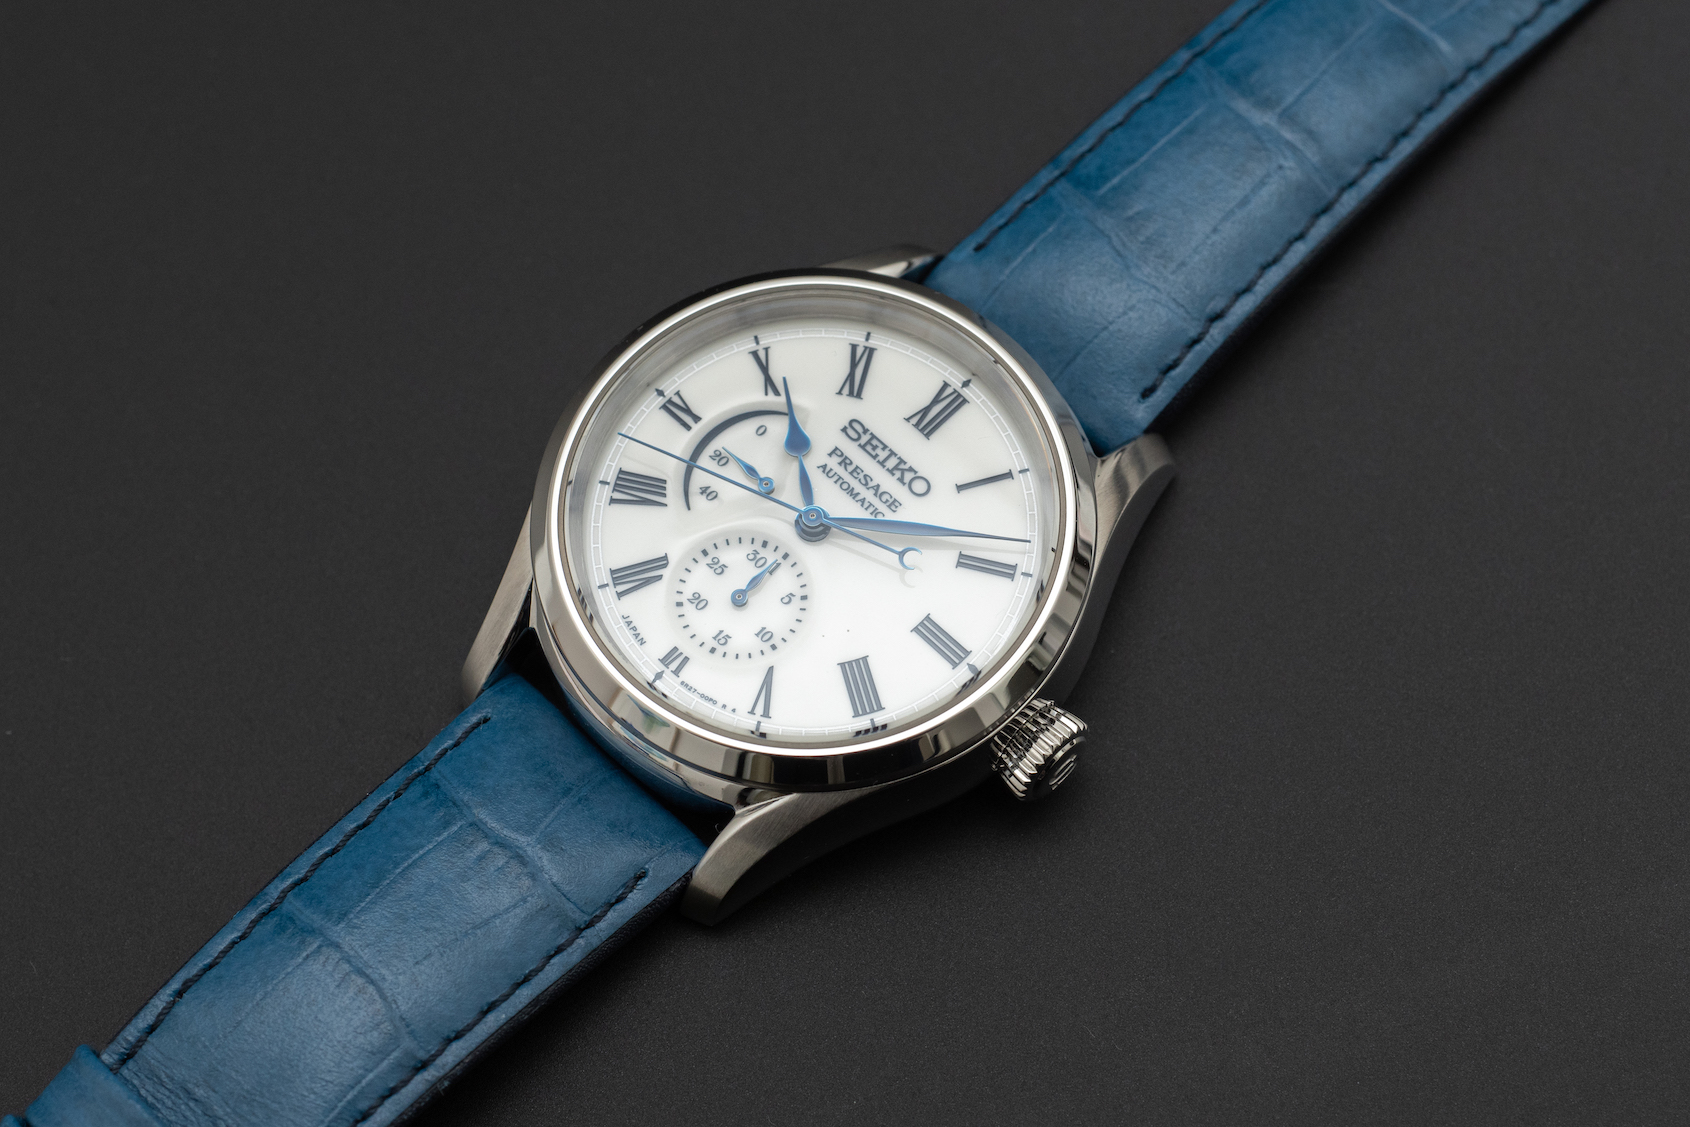 INTRODUCING: The Seiko SPB171 Limited Edition Arita Porcelain Dial, a  liquid white delight - Time and Tide Watches